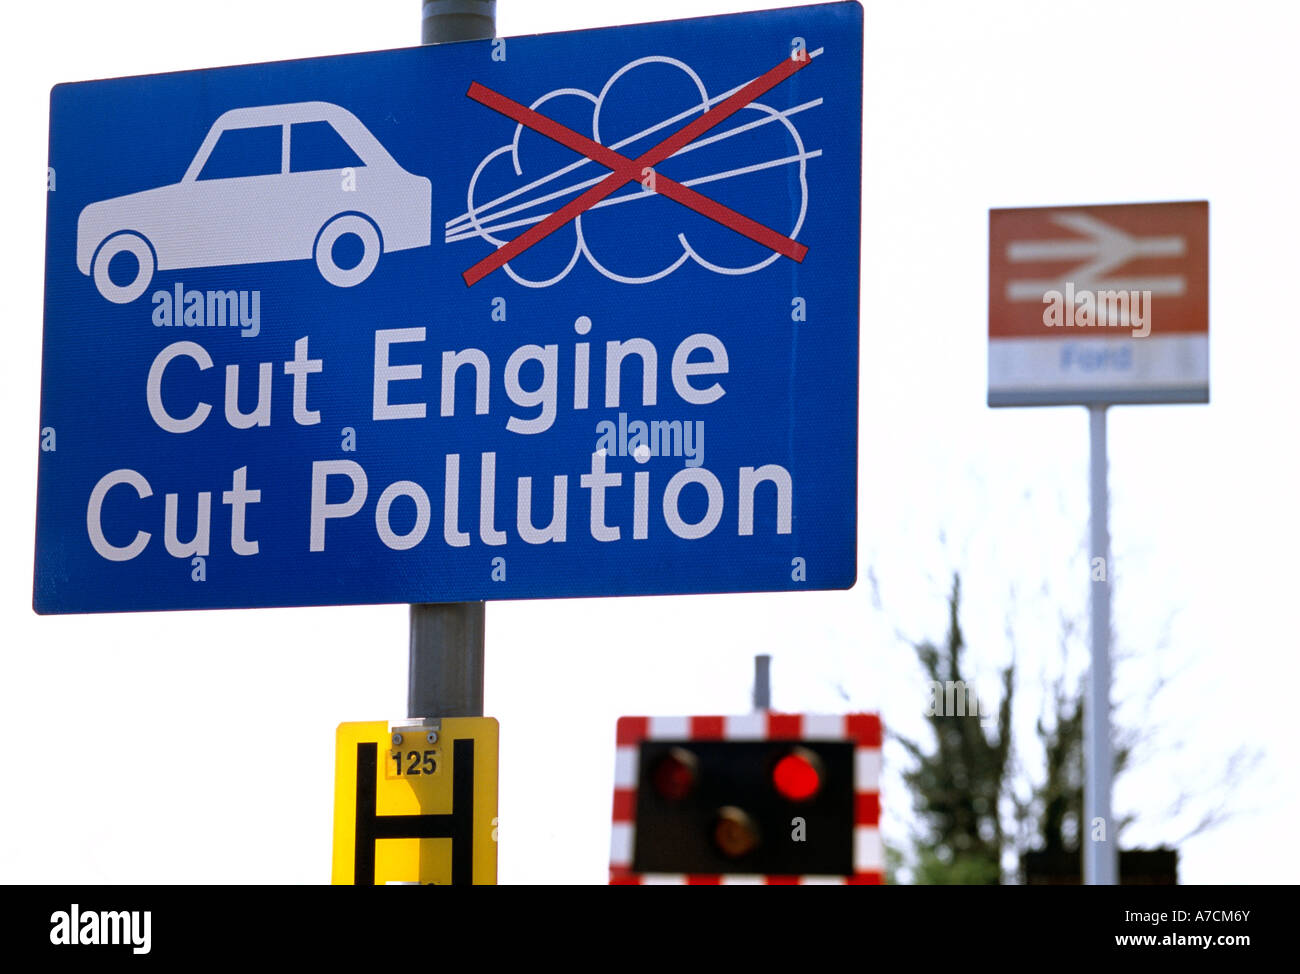 Cut Engine Cut Pollution sign at a railway crossing, Ford, West Sussex, England, UK. Stock Photo